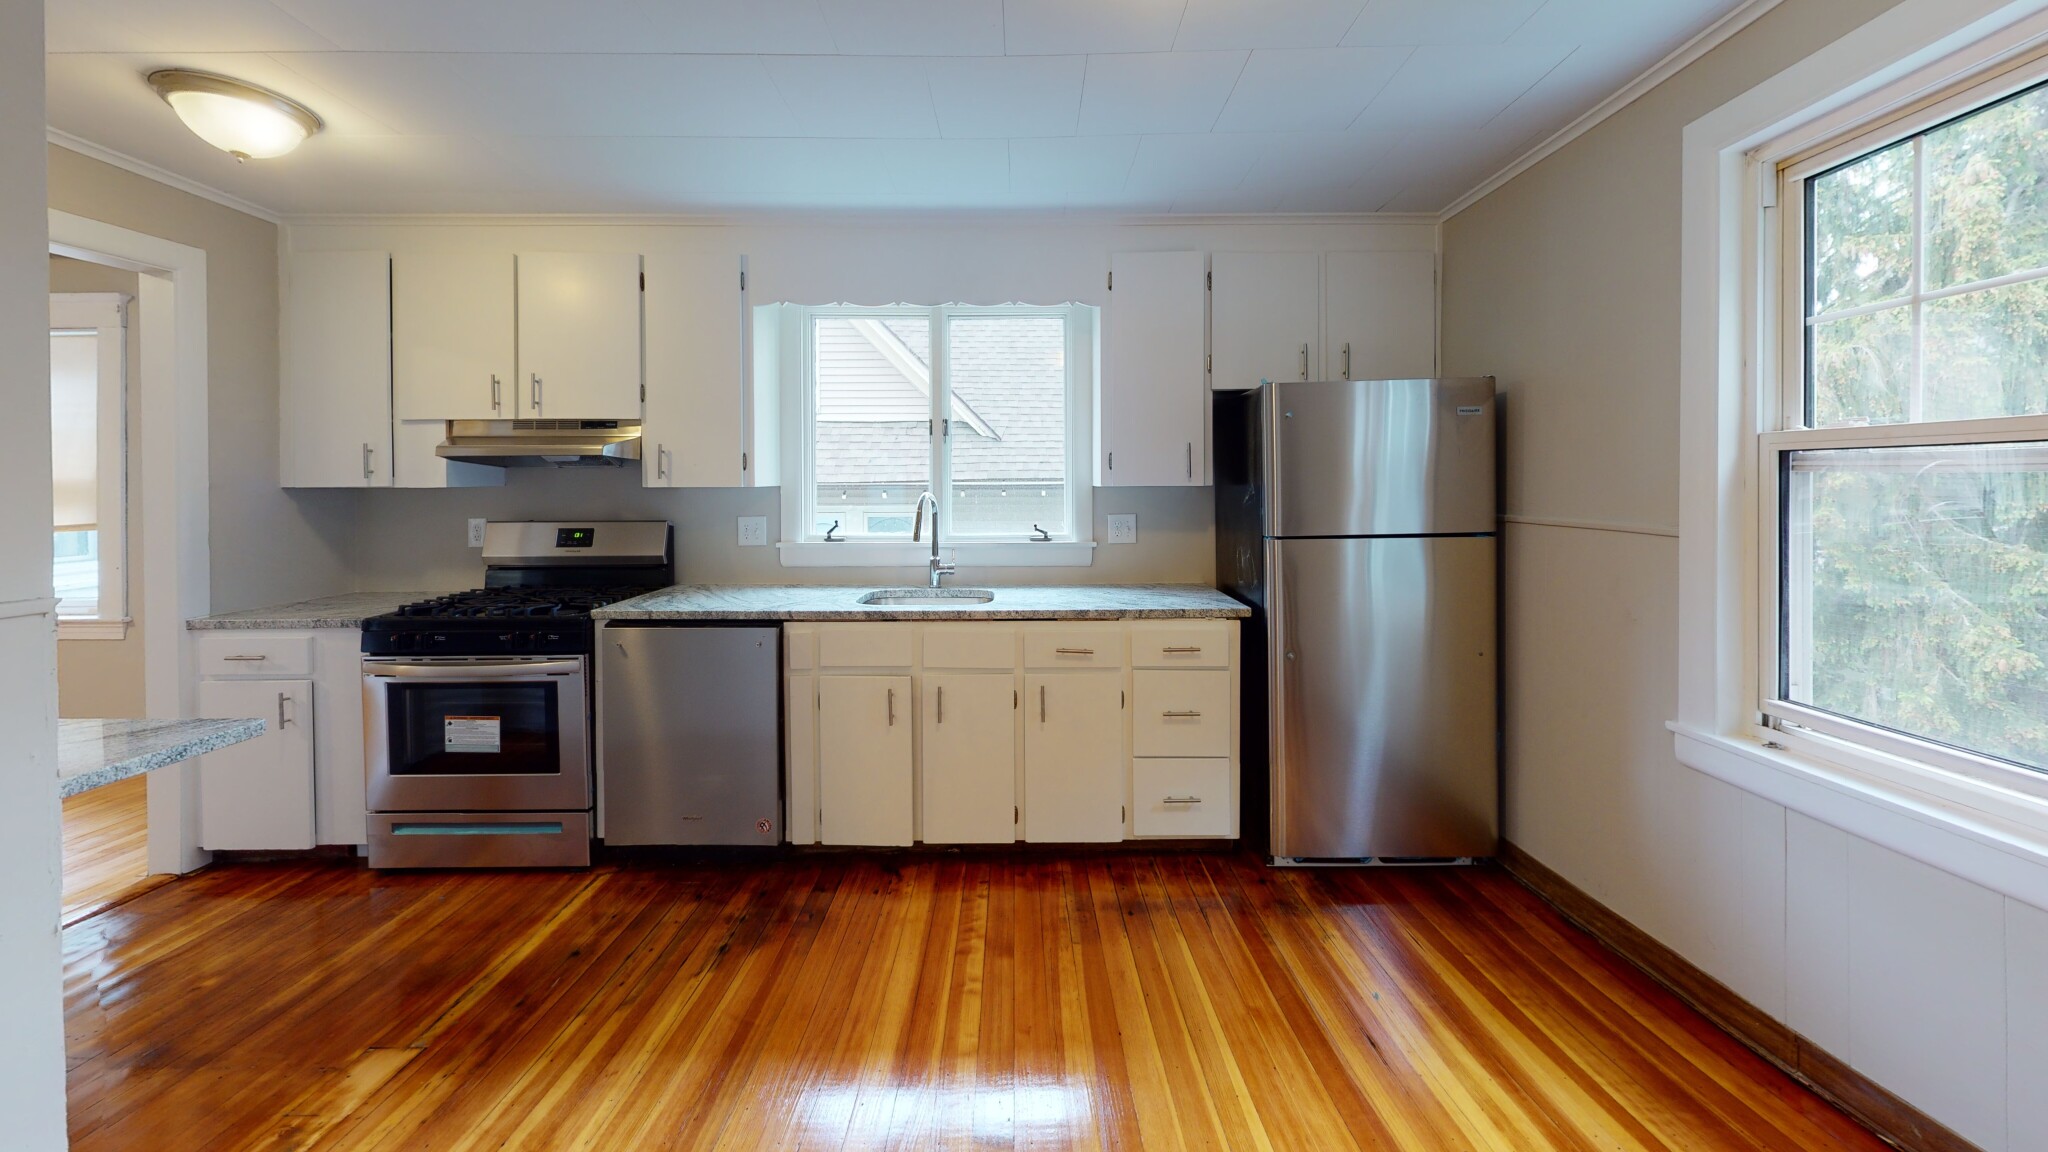 Photos of apartment on Chestnut Hill Ave.,Boston MA 02135